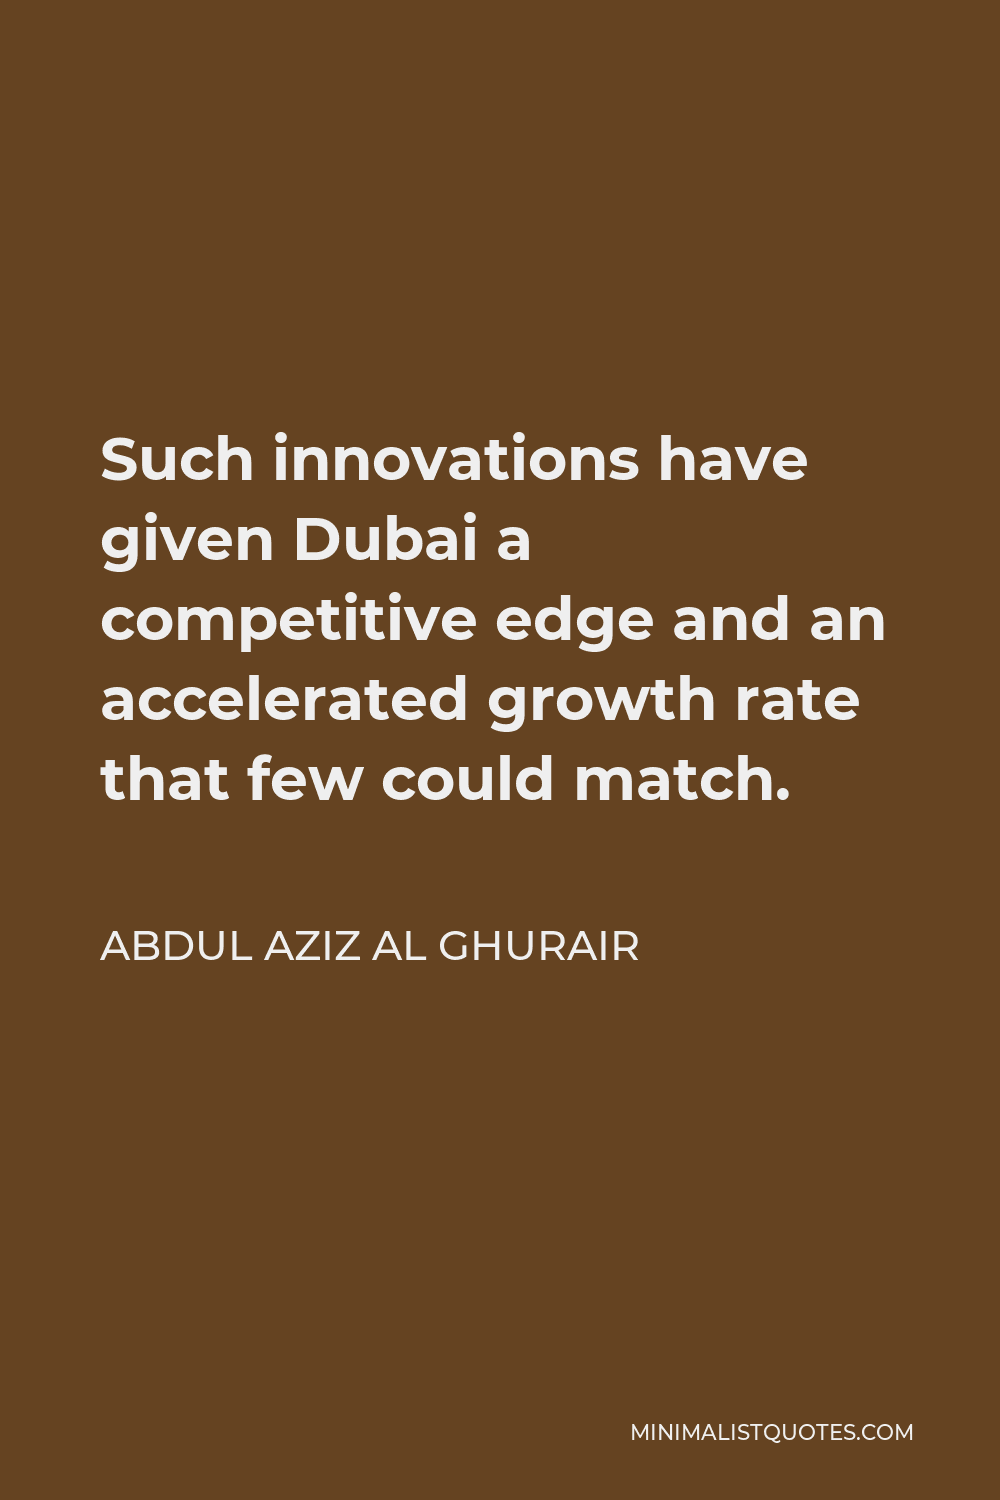 Abdul Aziz Al Ghurair Quote - Such innovations have given Dubai a competitive edge and an accelerated growth rate that few could match.